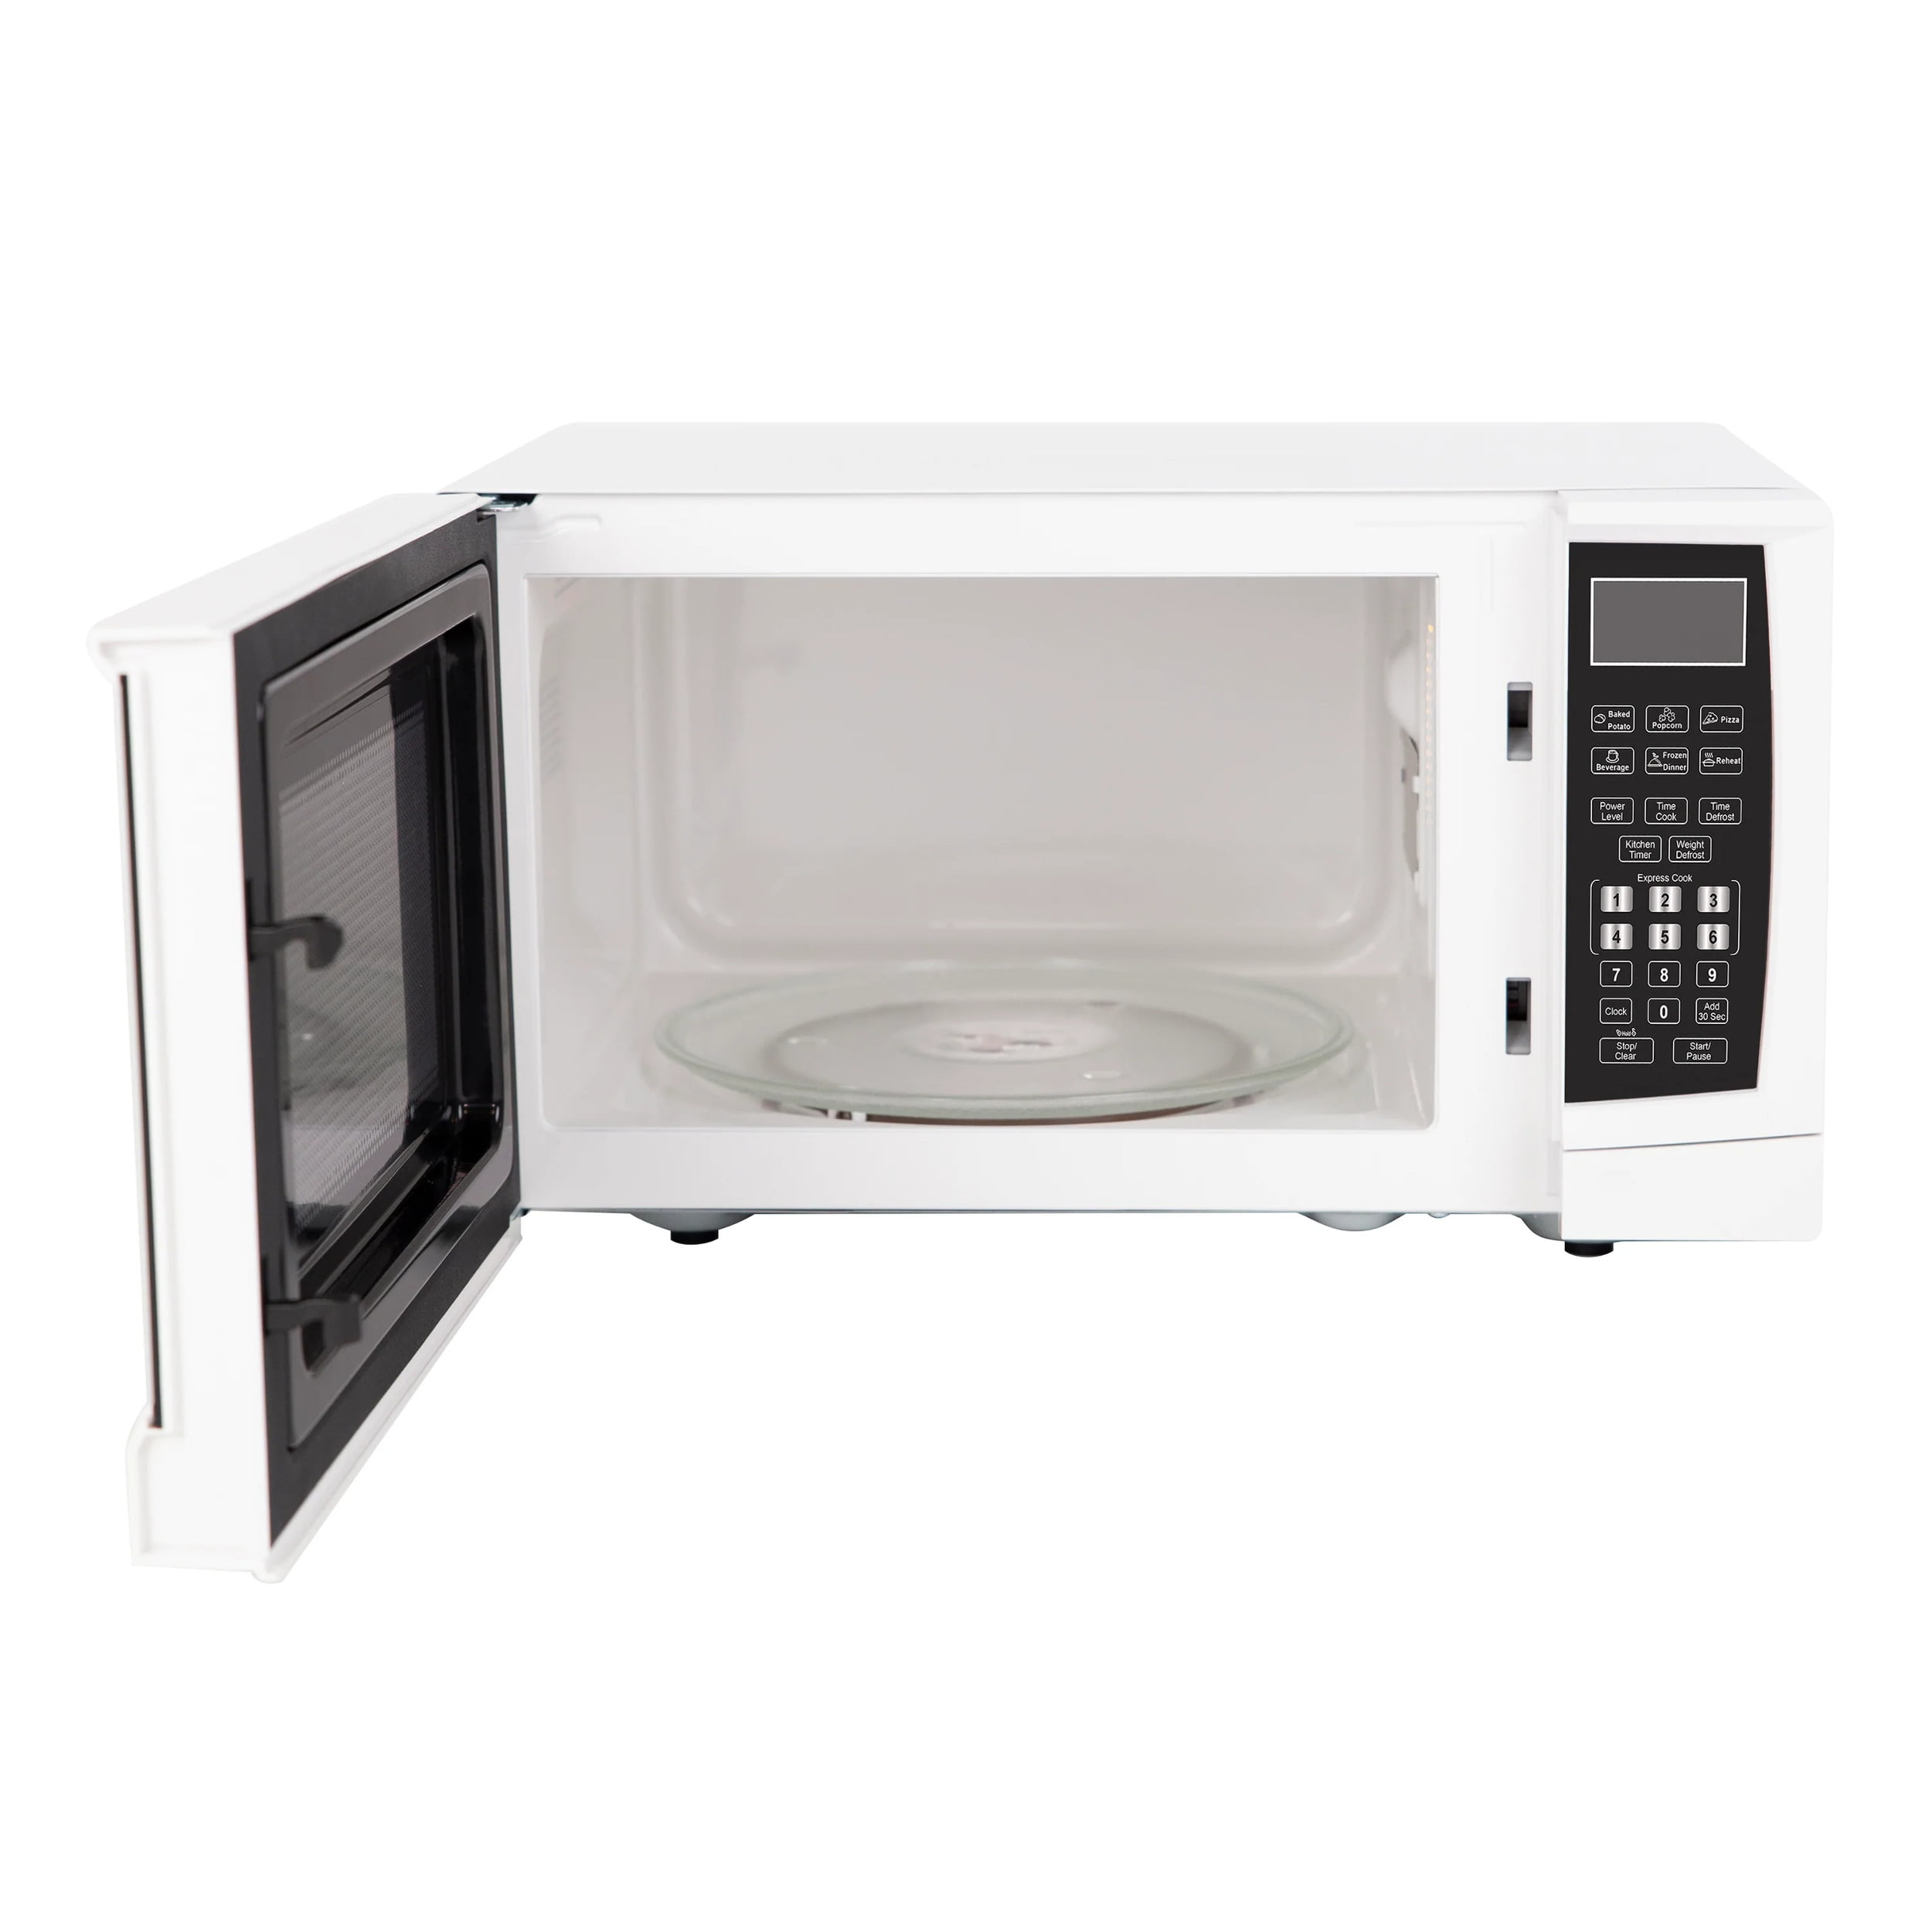 West Bend WBMW92B Microwave Oven 900-Watts Compact with 6 Pre Cooking  Settings, Speed Defrost, Electronic Control Panel and Glass Turntable, Black